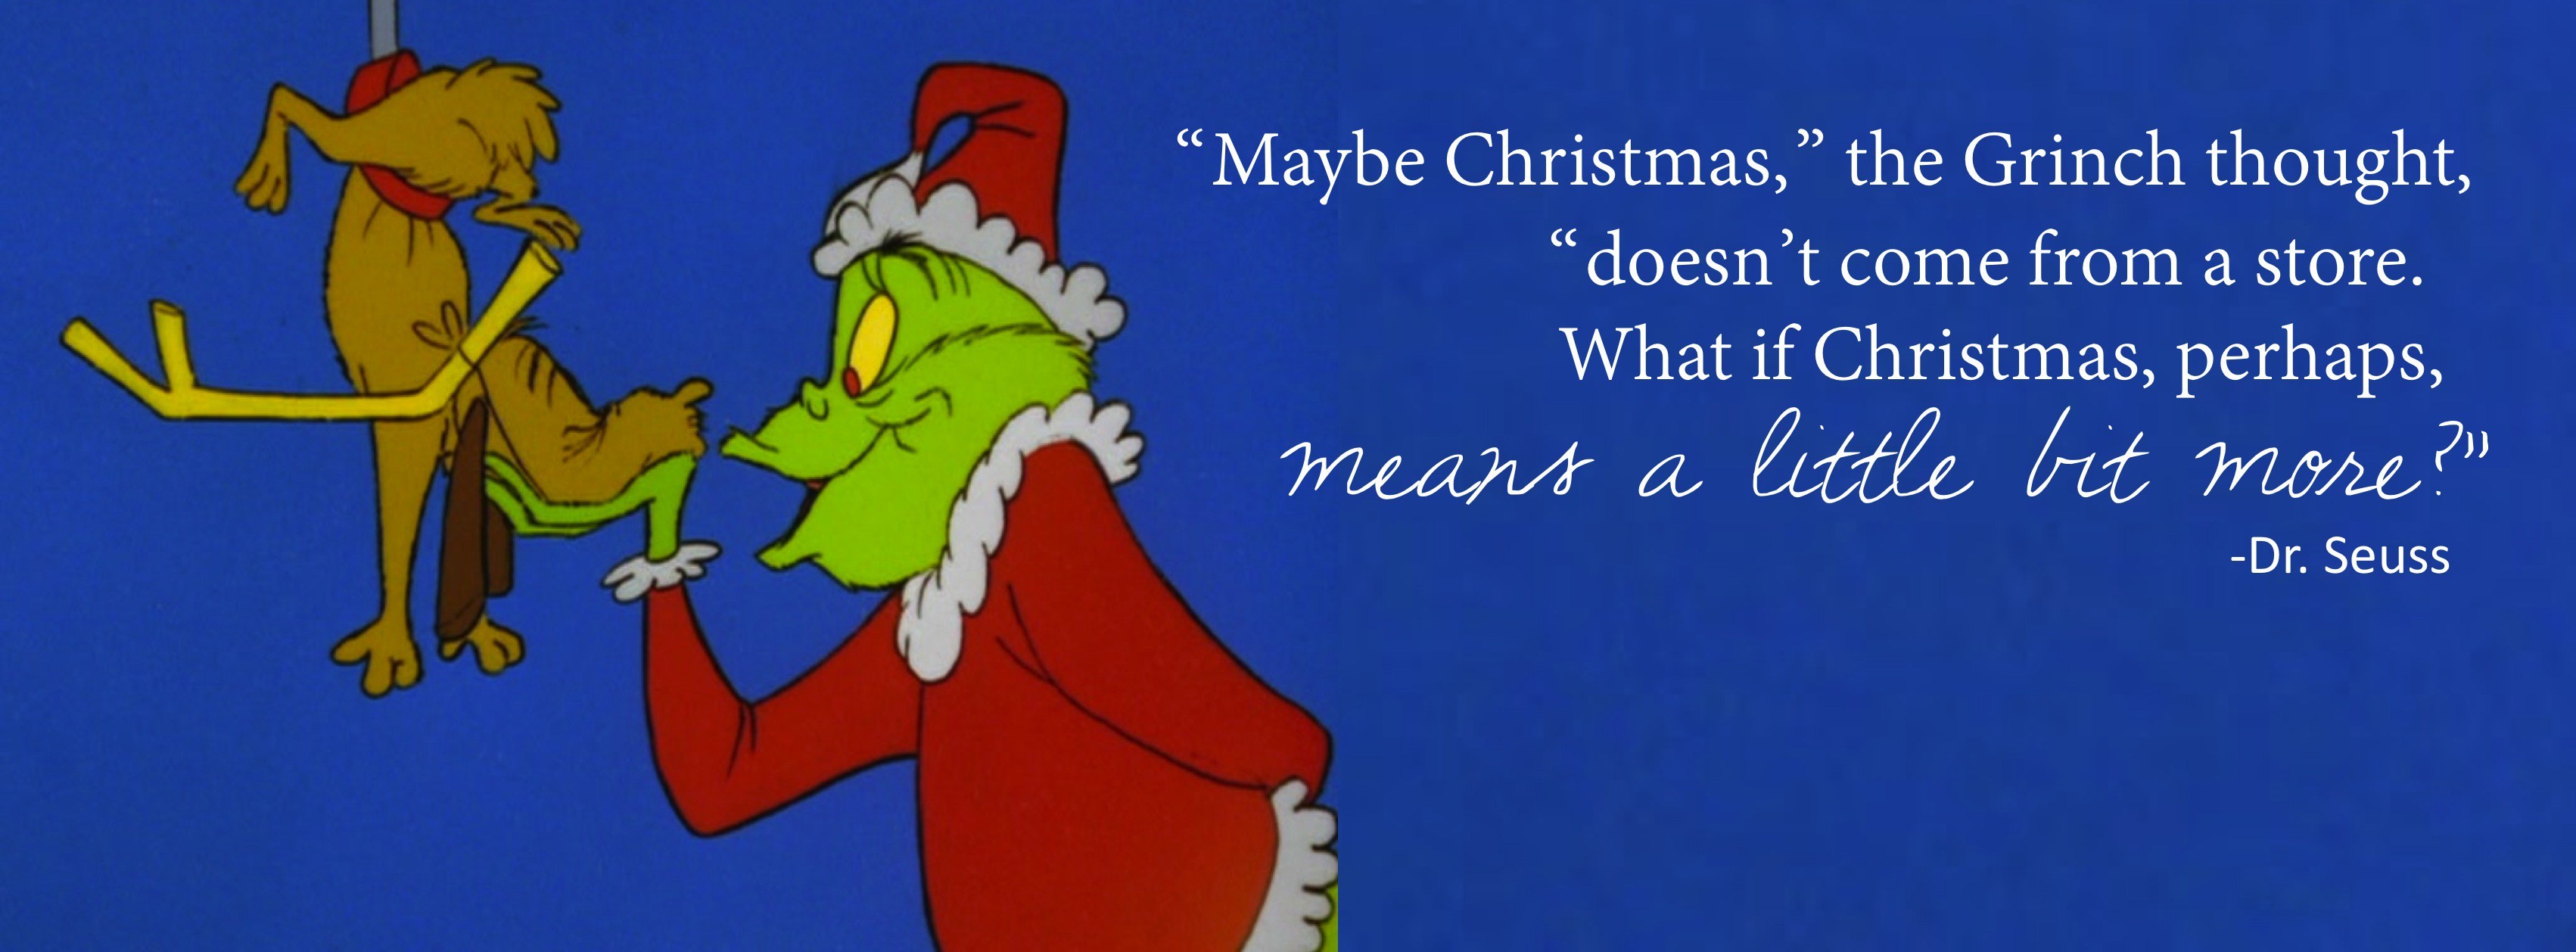 How the Grinch Stole Christmas Grinch In Moon Background HD The Grinch  Wallpapers  HD Wallpapers  ID 51369